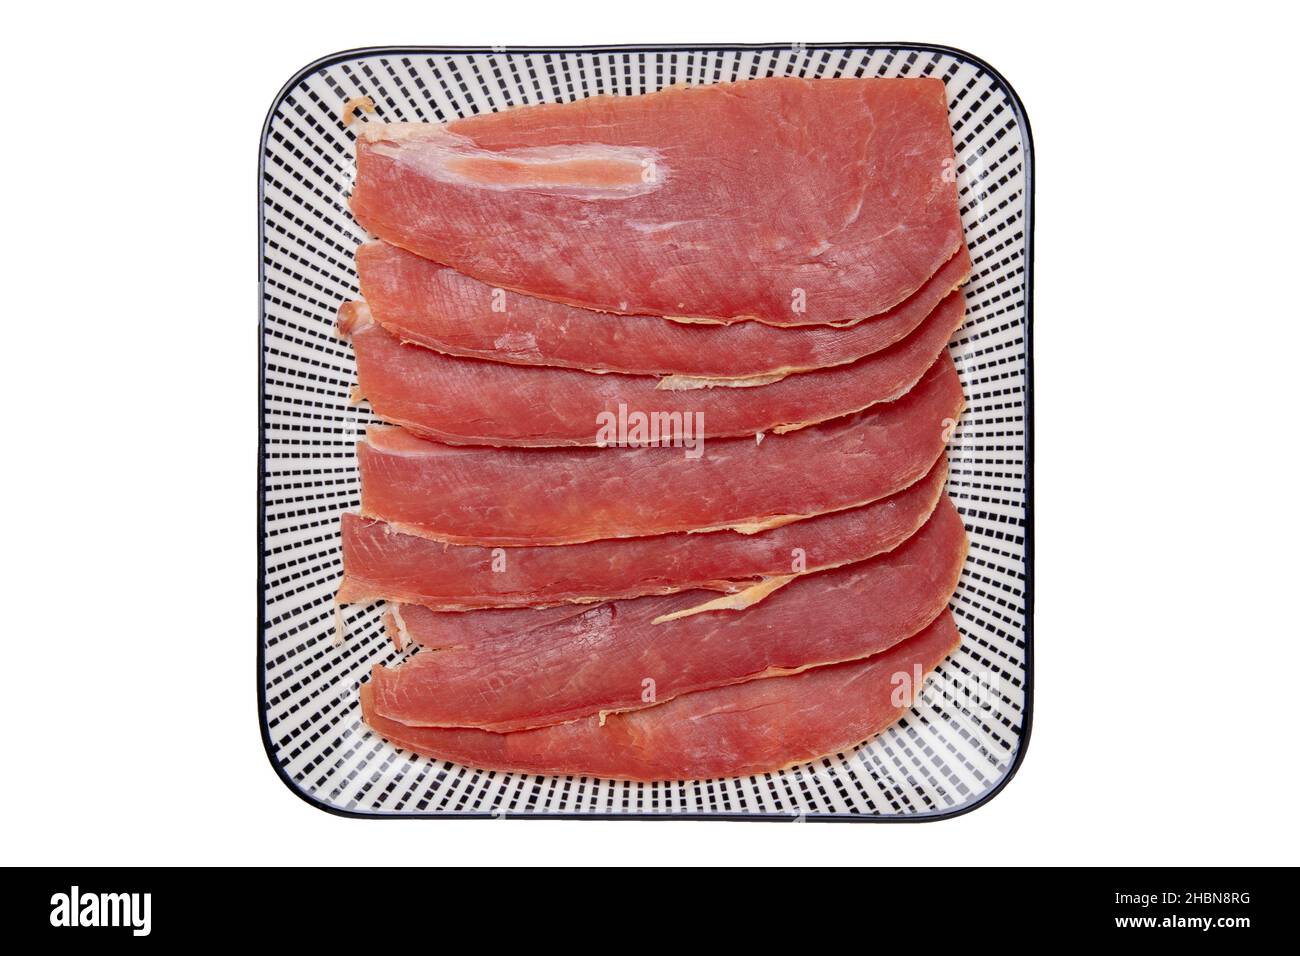 Spanish food. Top view of pieces of sliced dry spanish ham (Jamon Serrano) or italian parma prosciutto crudo on a plate isolated on a white background Stock Photo